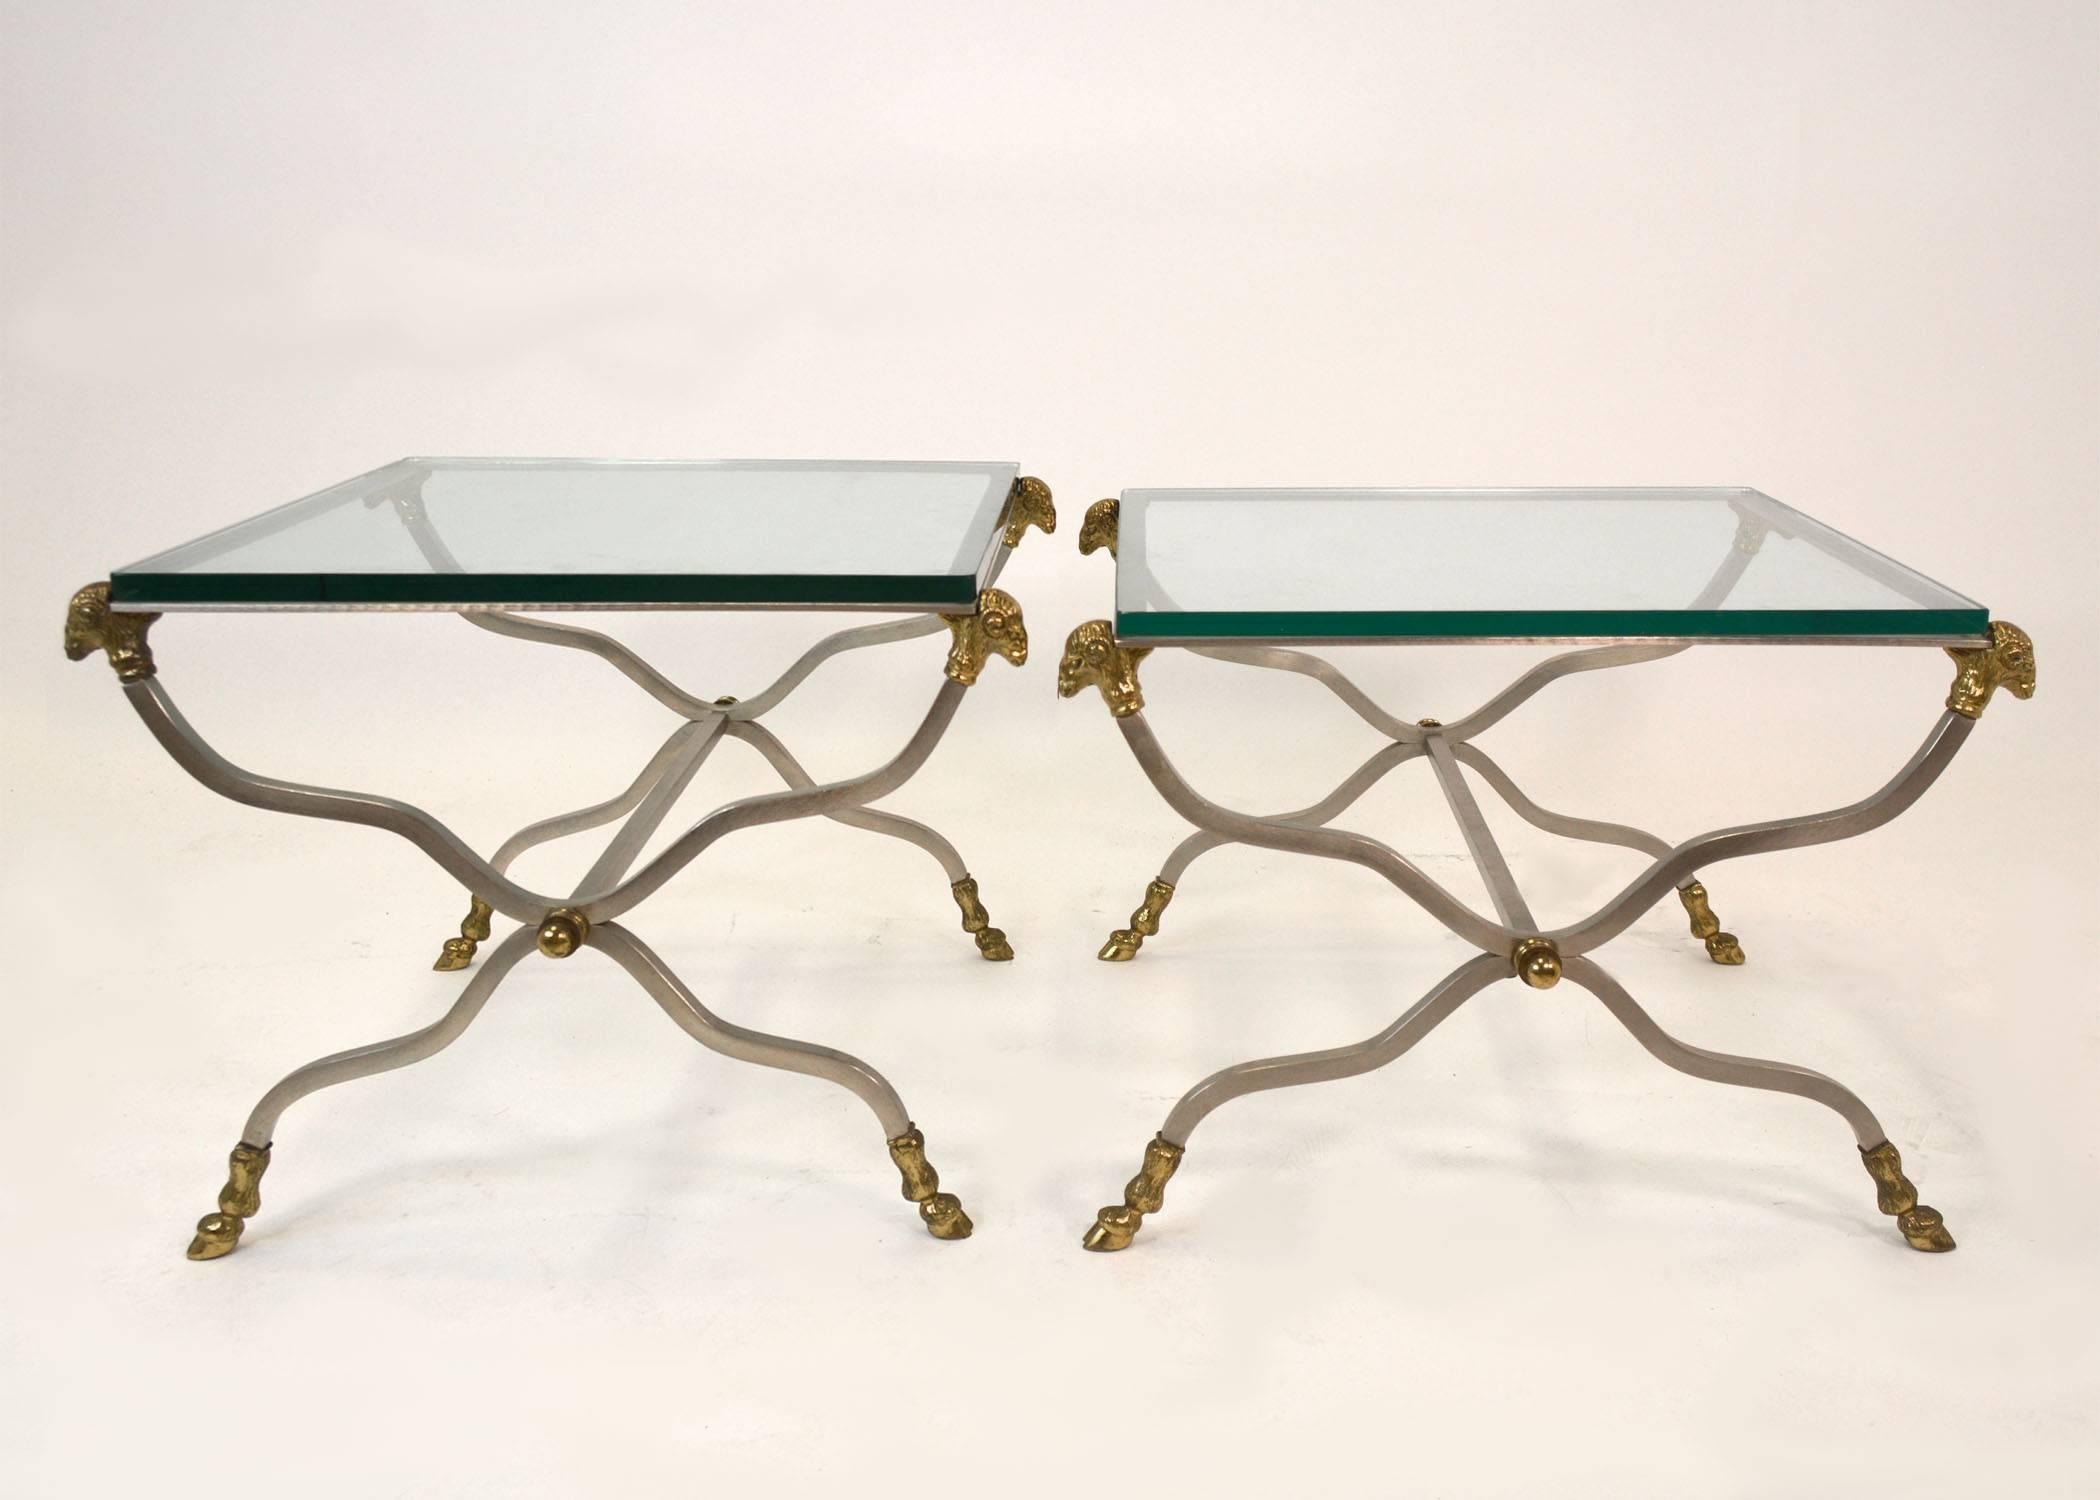 A good pair of Italian steel and brass side tables with thick glass tops. Rams head and hoof mounts, In the style of Maison Jansen. Marked 